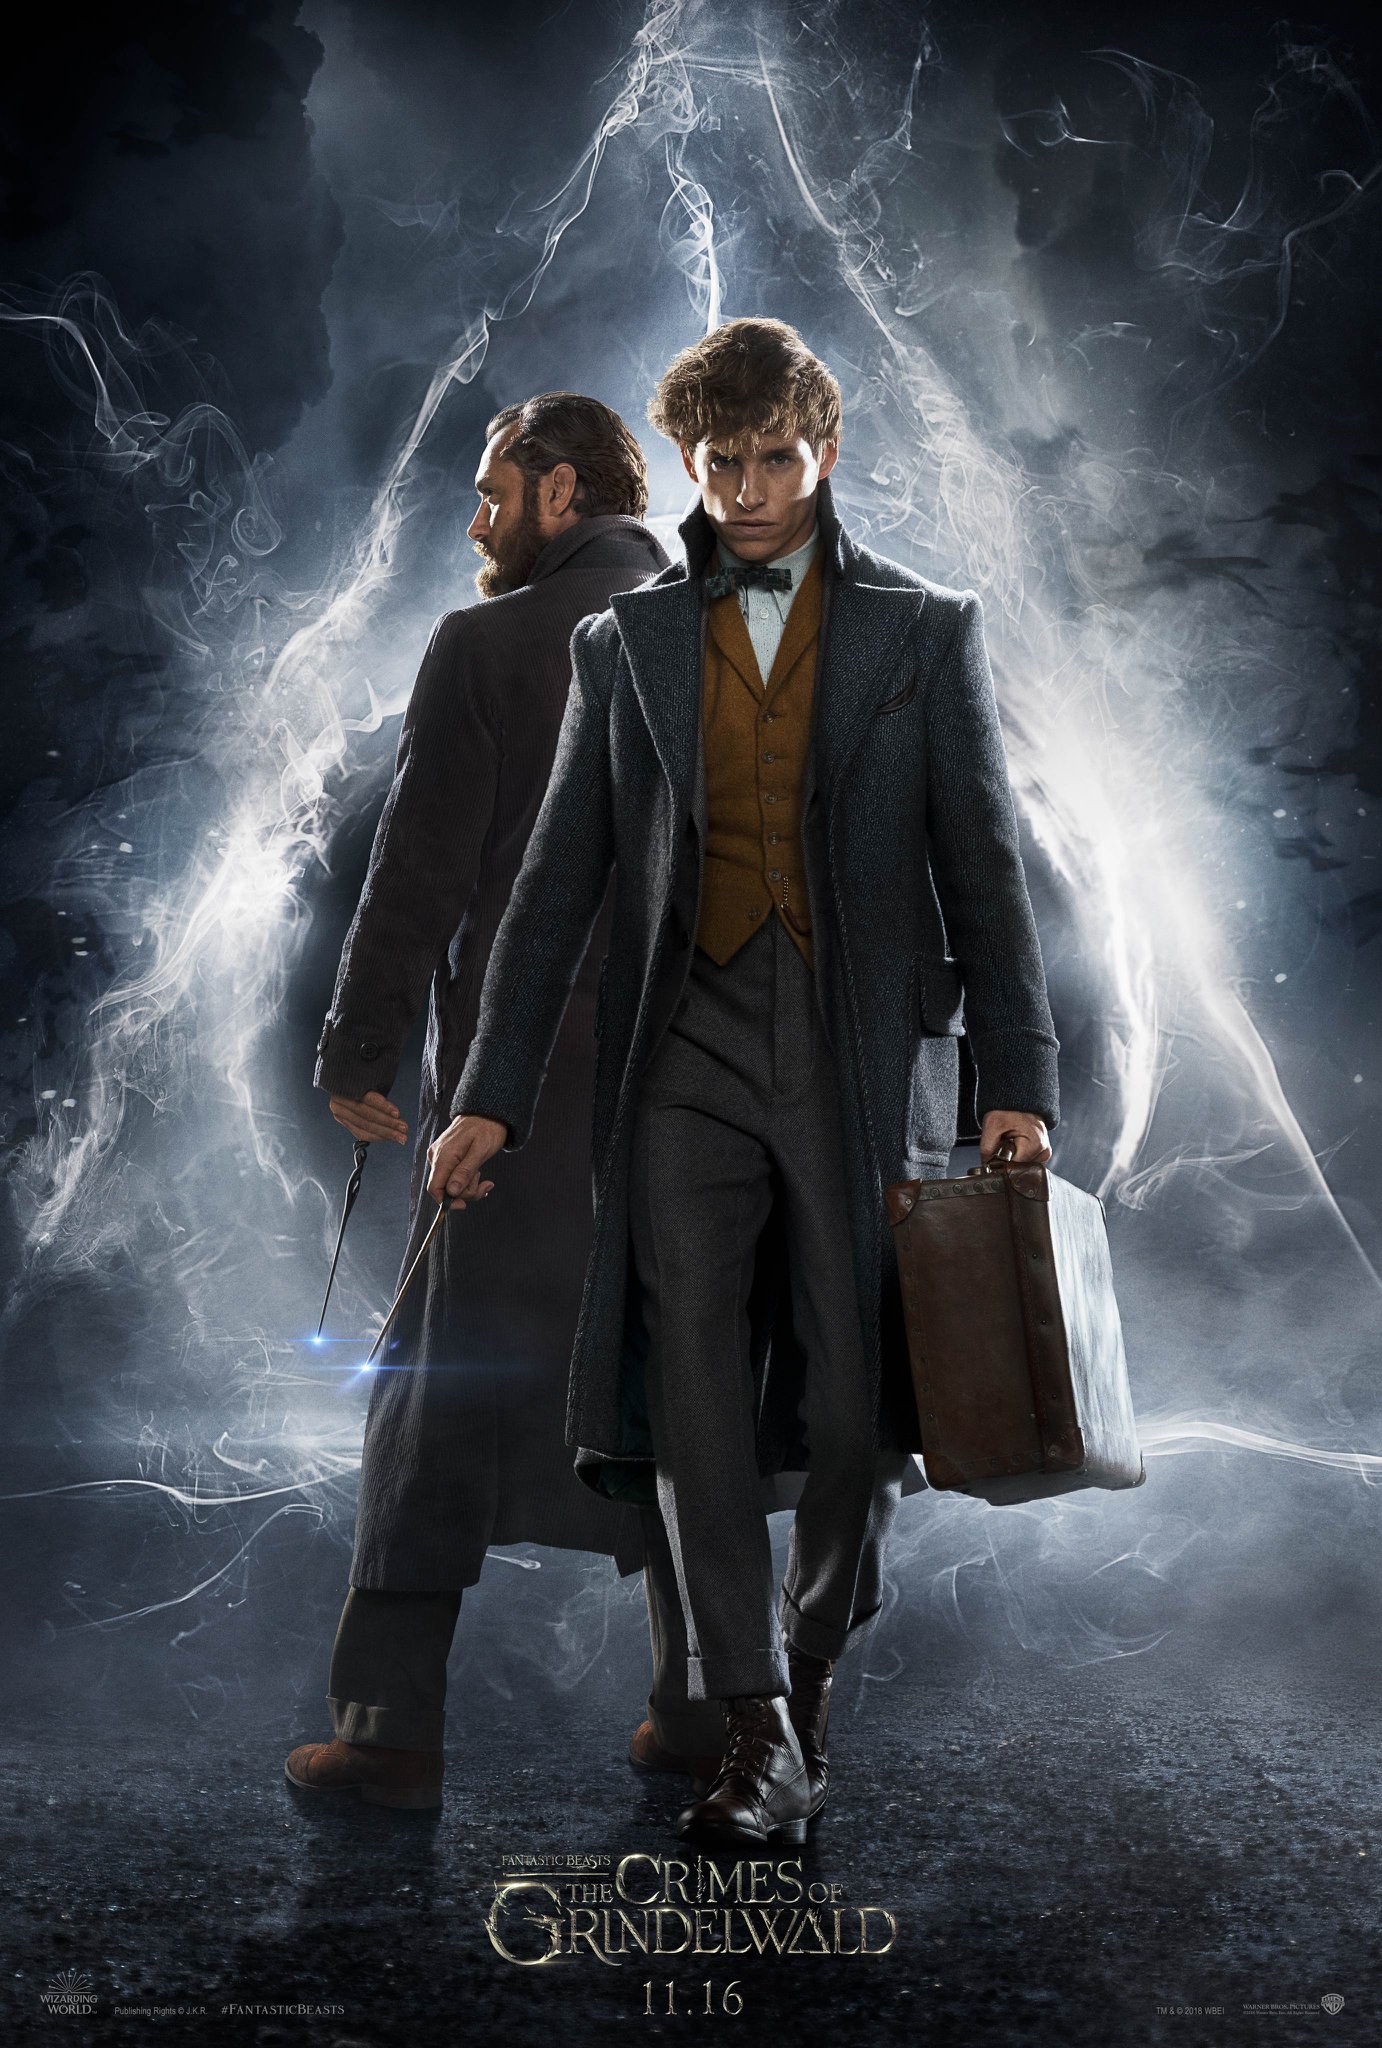 Fantastic Beasts The Crimes of Grindelwald Poster Maart 2018